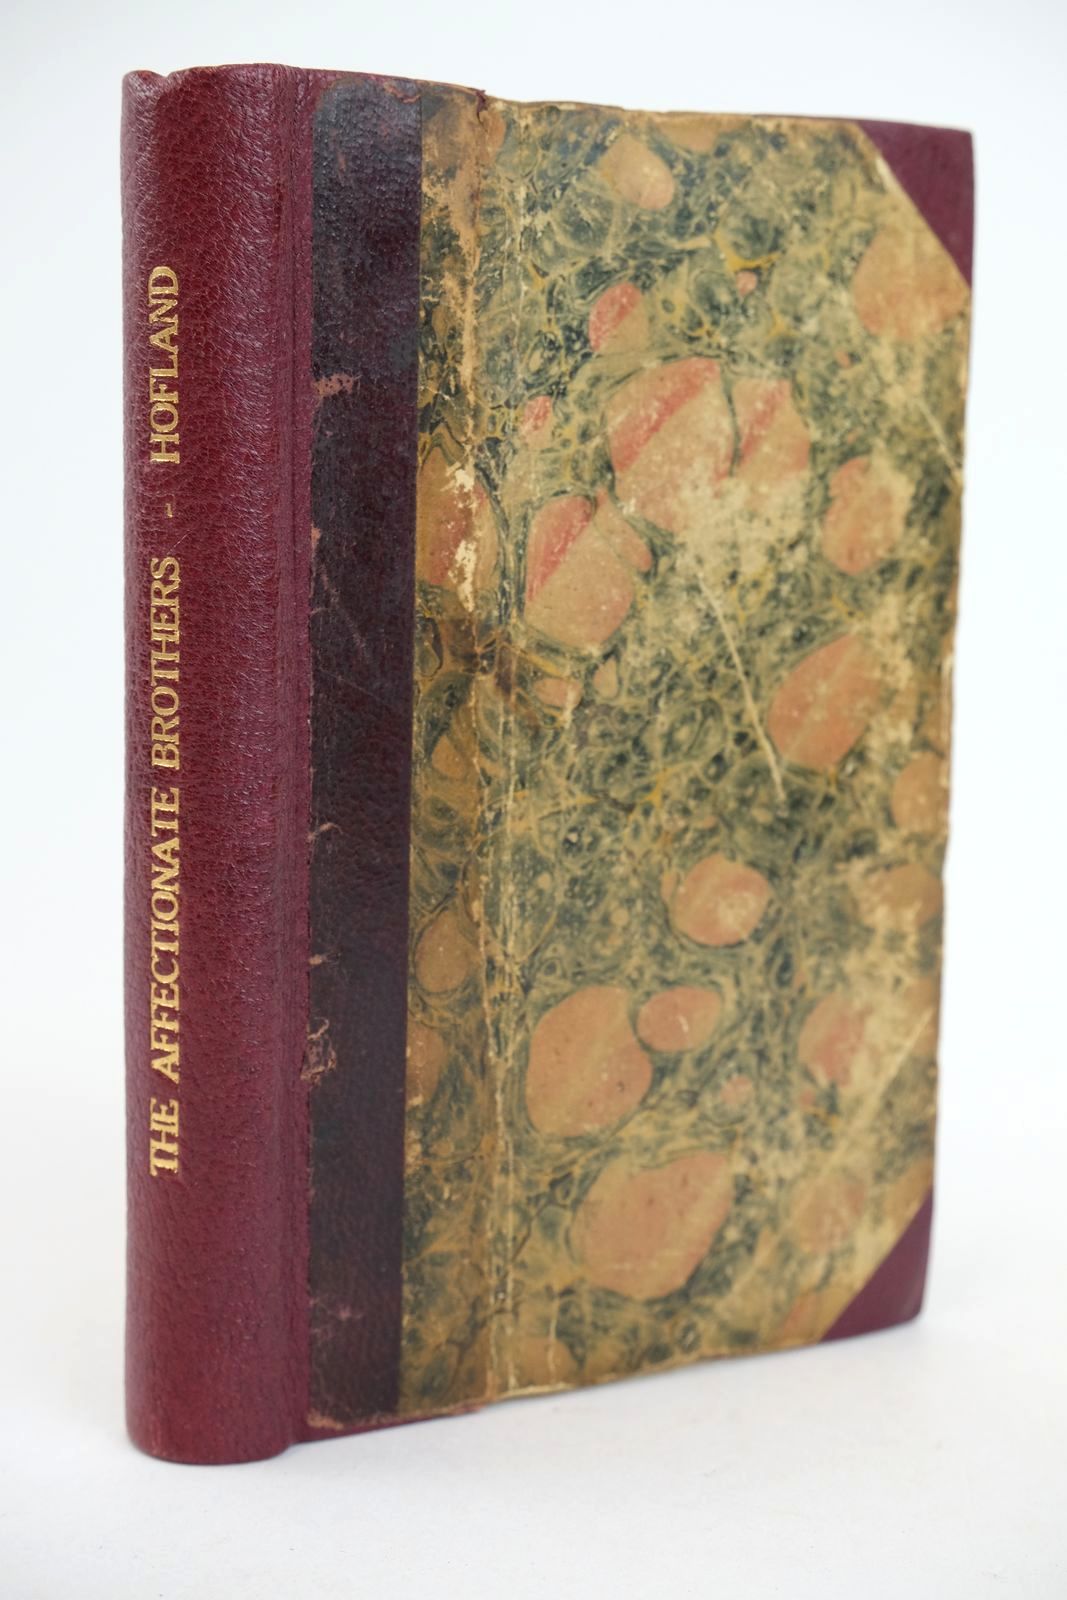 Photo of THE AFFECTIONATE BROTHERS written by Hofland, Mrs. published by A.K. Newman and Co. (STOCK CODE: 1318826)  for sale by Stella & Rose's Books